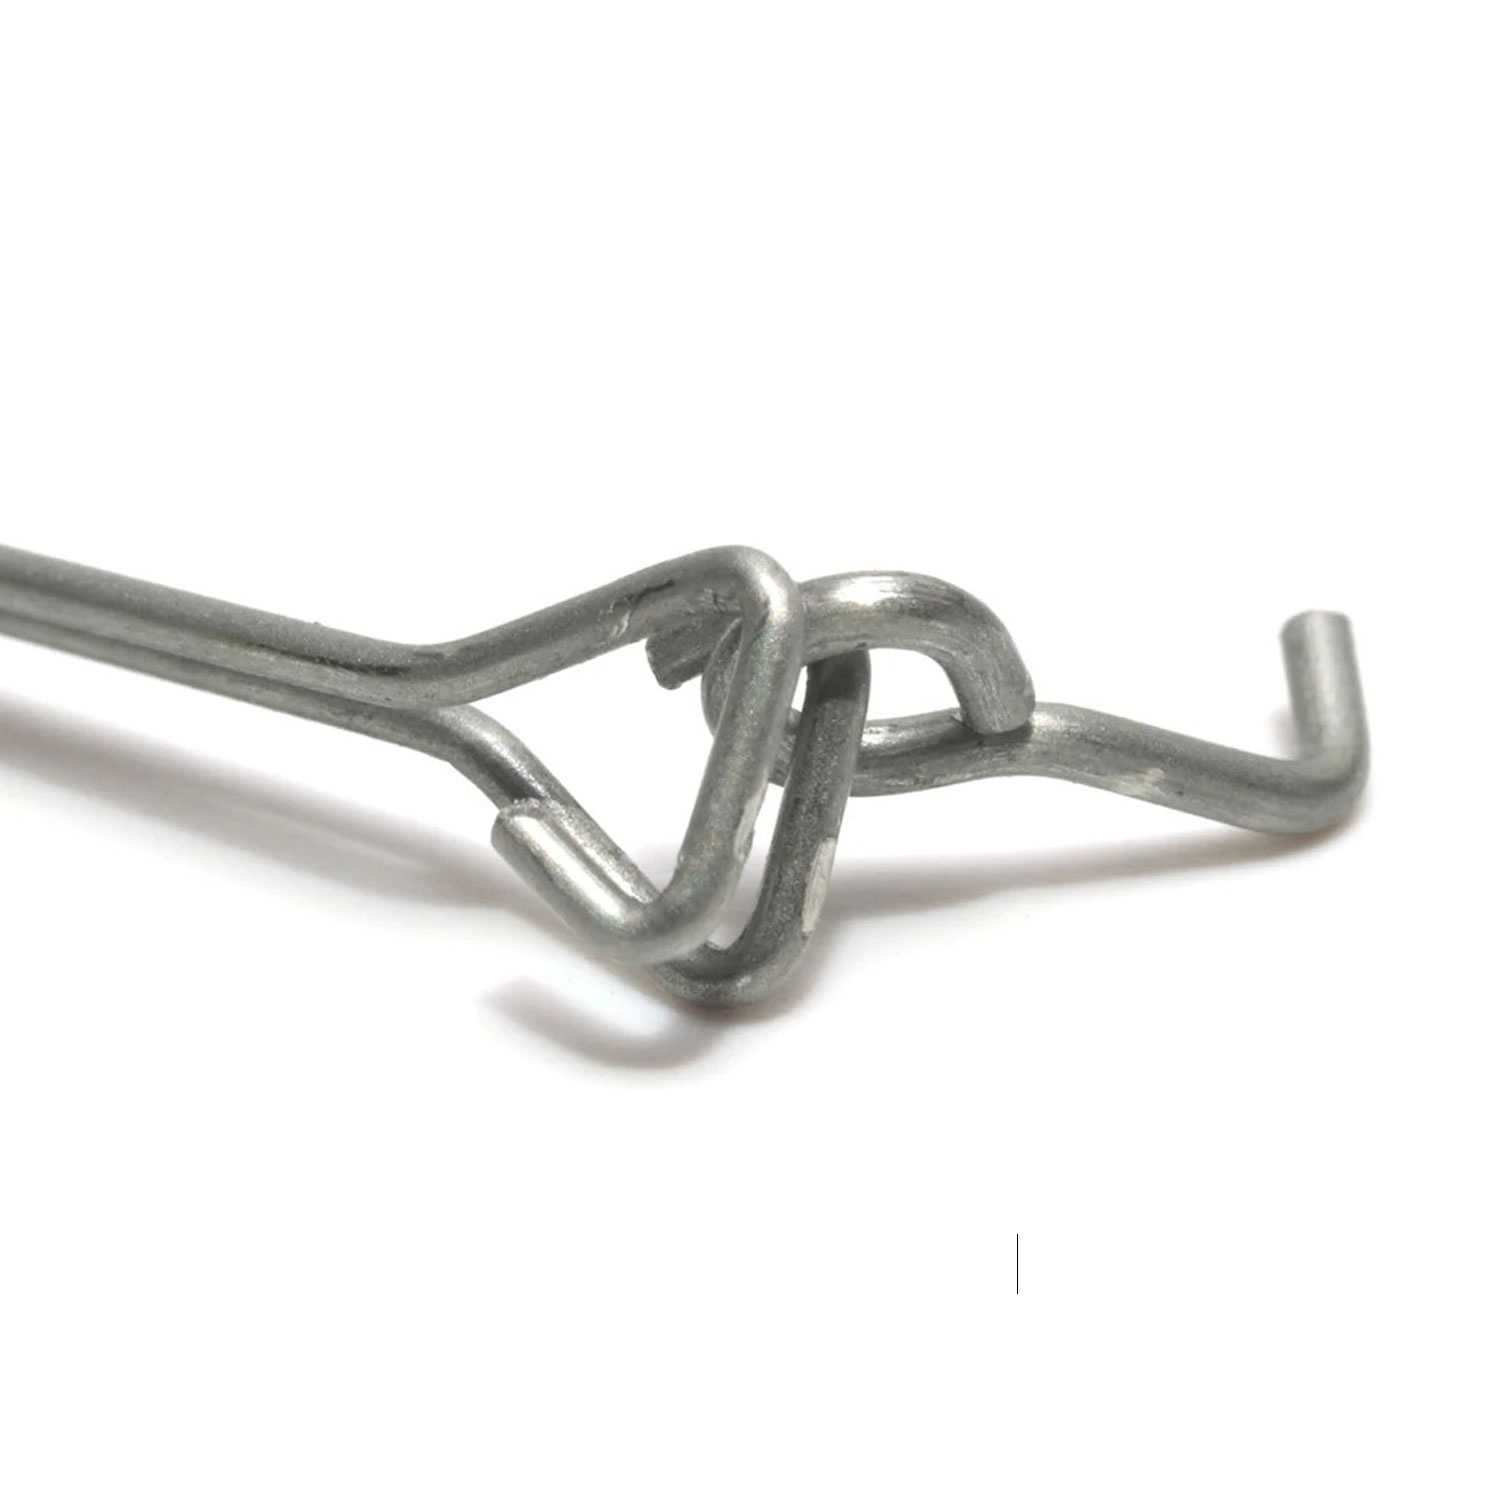 FS NGS Articulated Shank